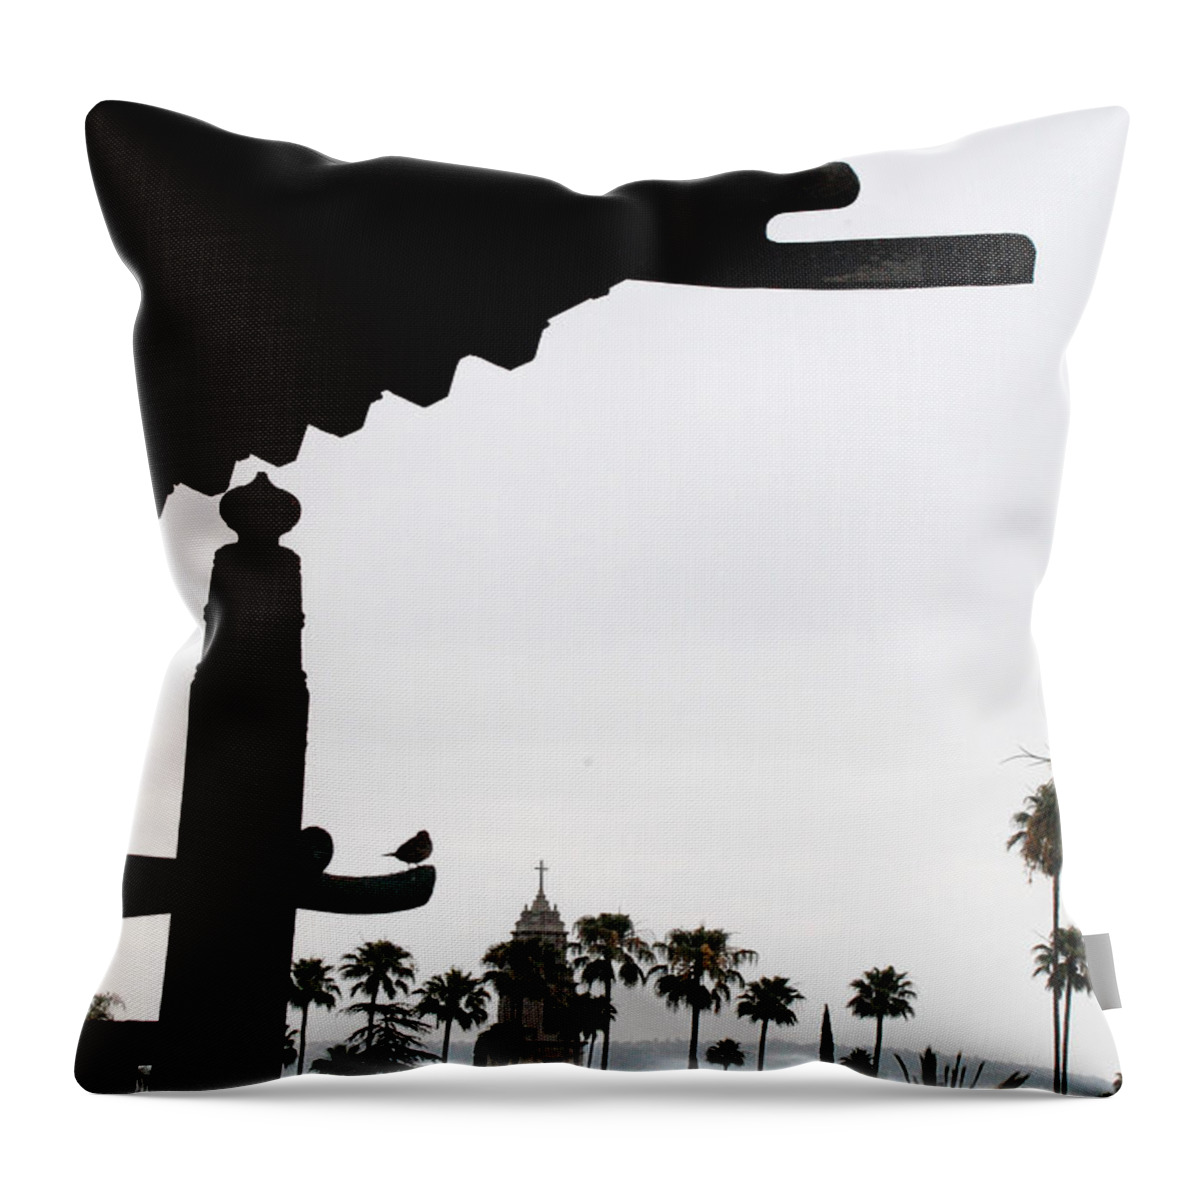 Mission Inn Throw Pillow featuring the photograph Mission Inn Silouhette by Amy Fose